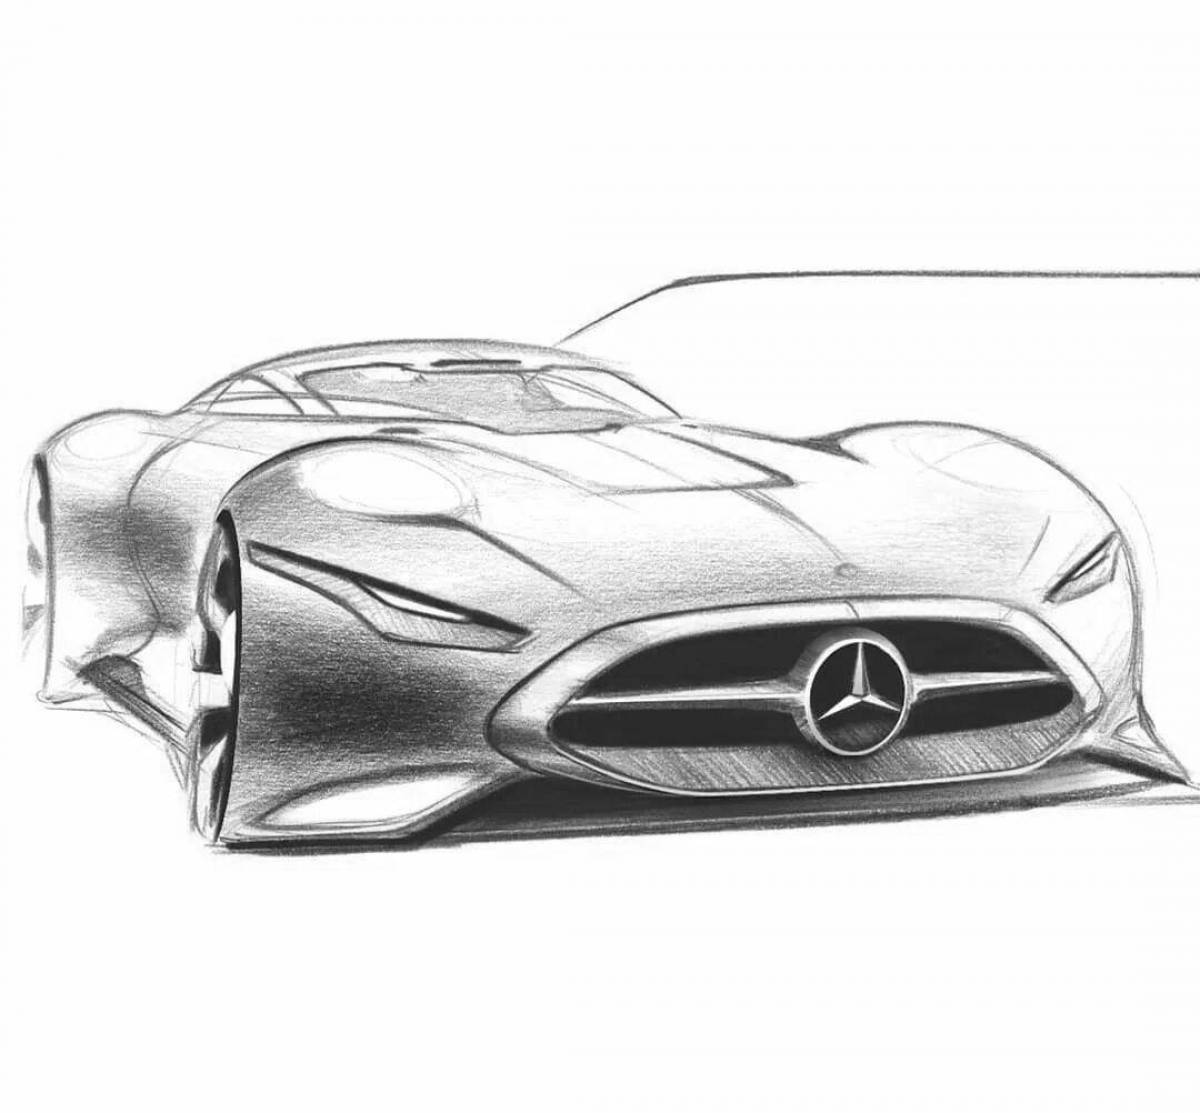 Dazzling Mercedes coloring of the future